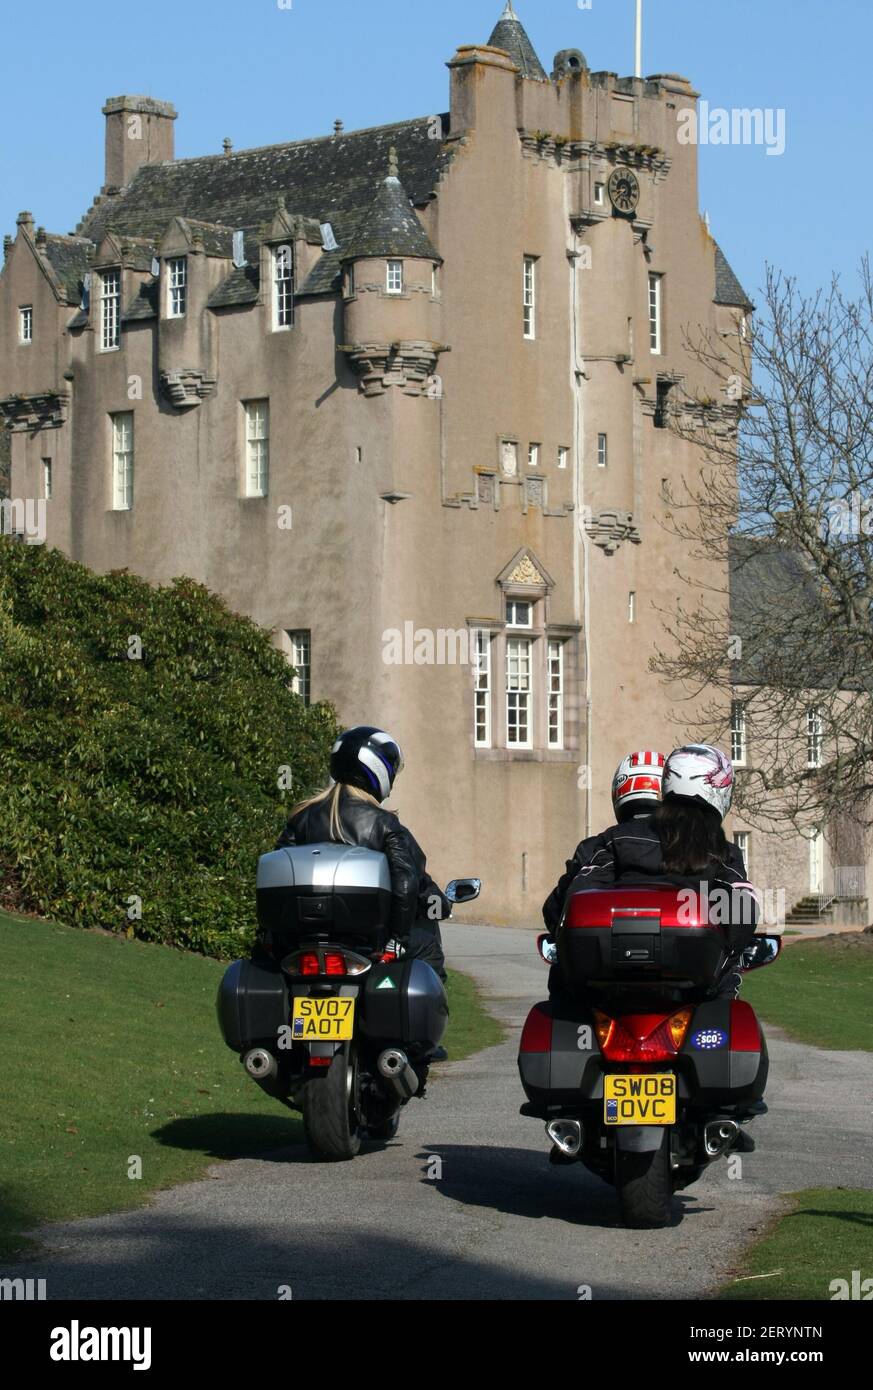 Motorcycling in Scotland by Crathes Castle, Aberdeenshire, Scotland Stock Photo